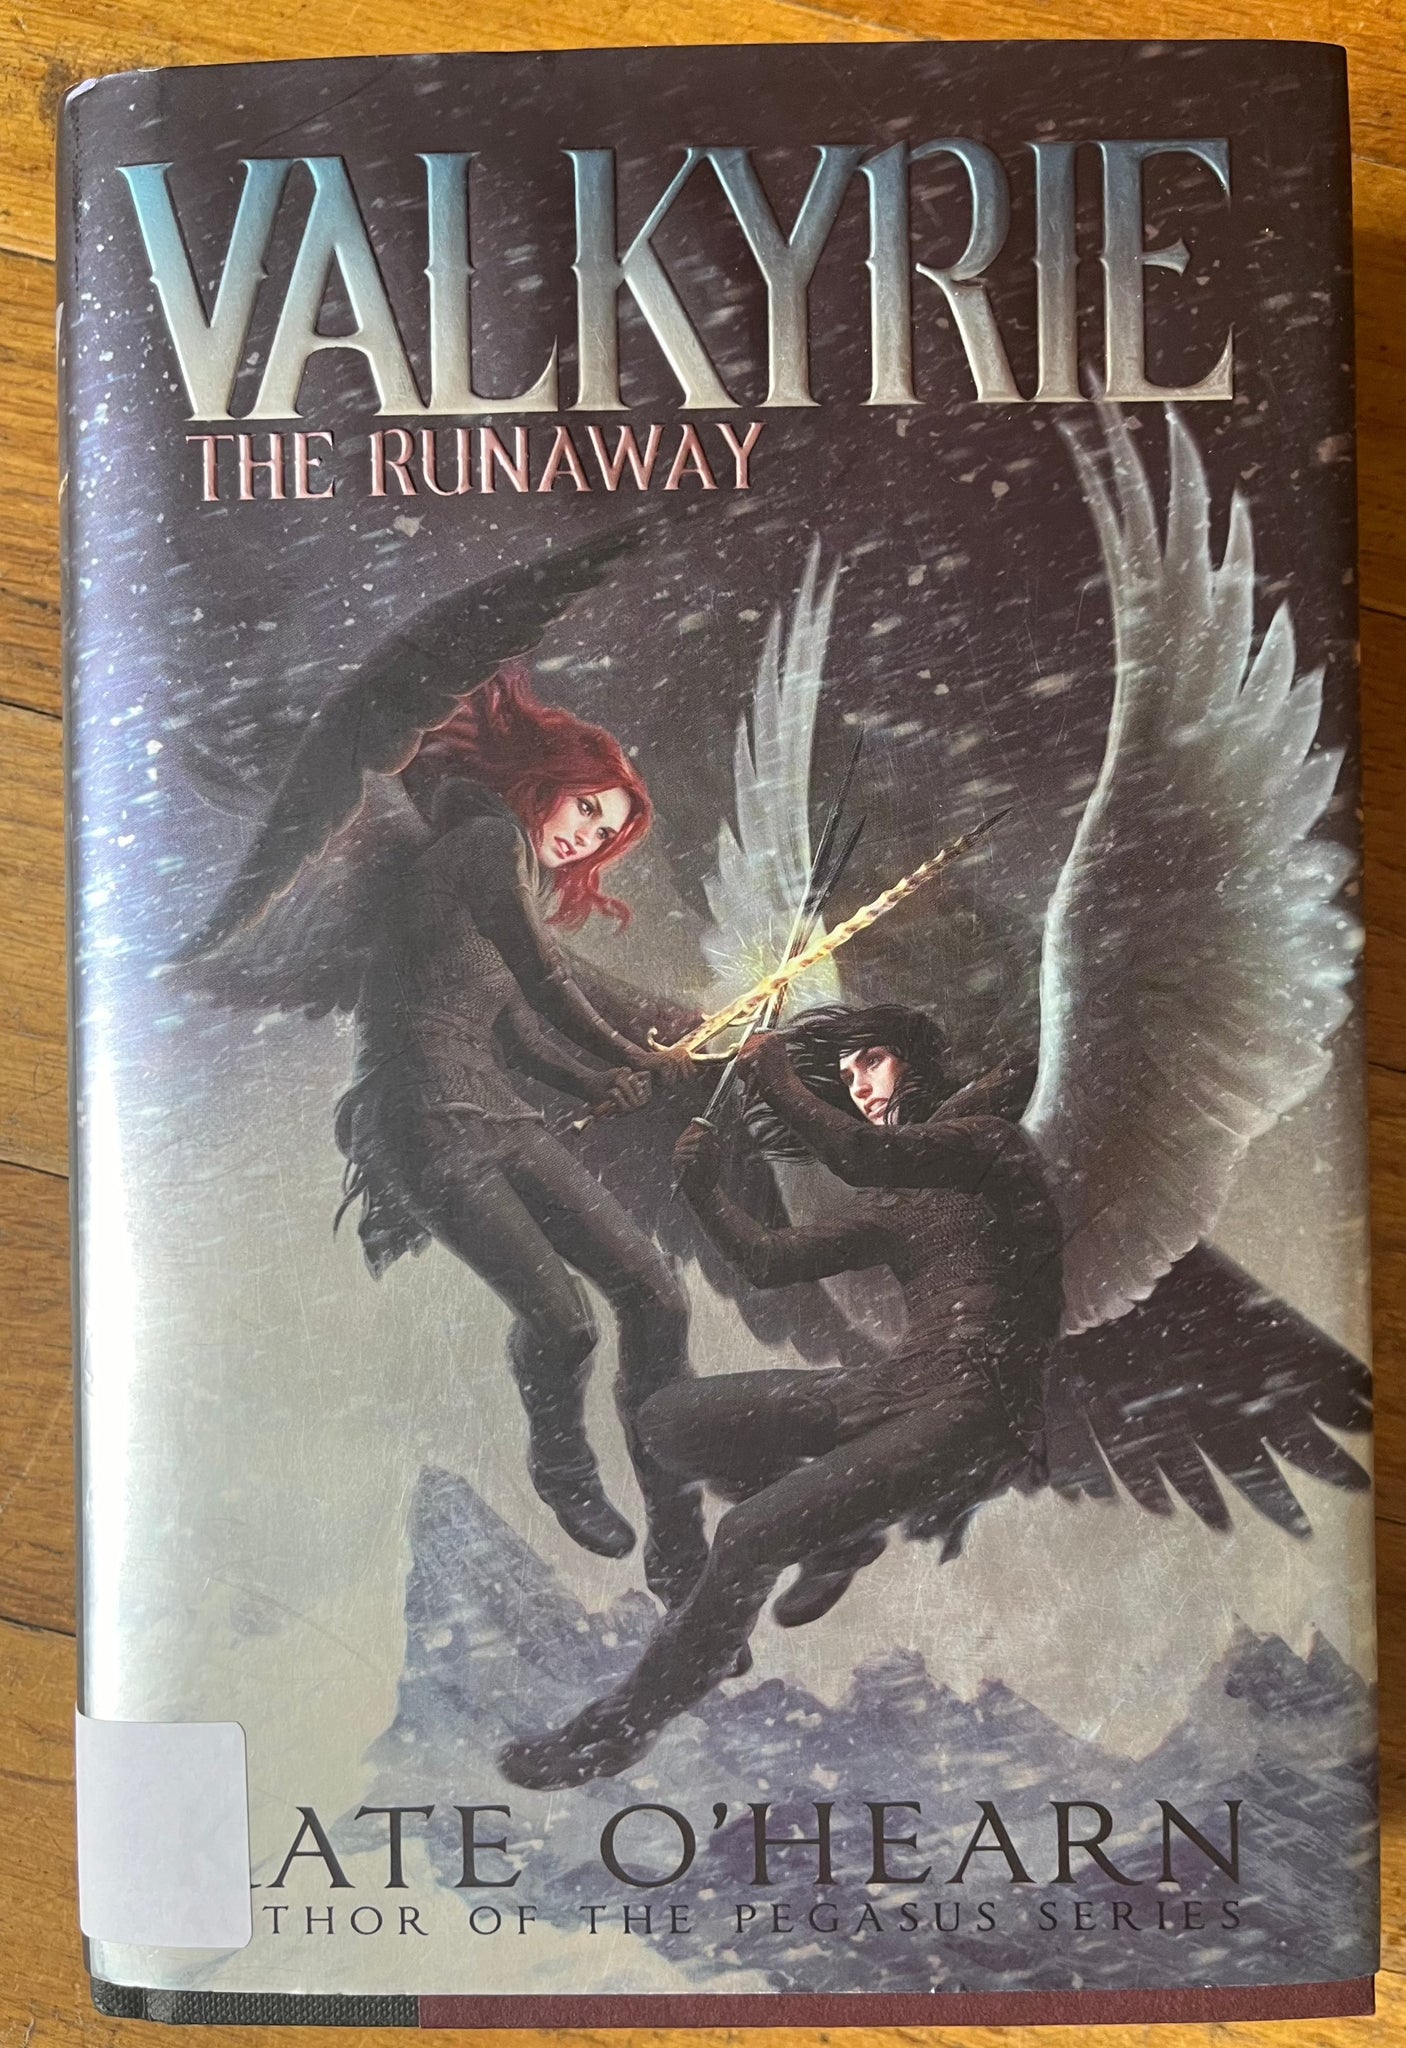 The Runaway (Valkyrie)